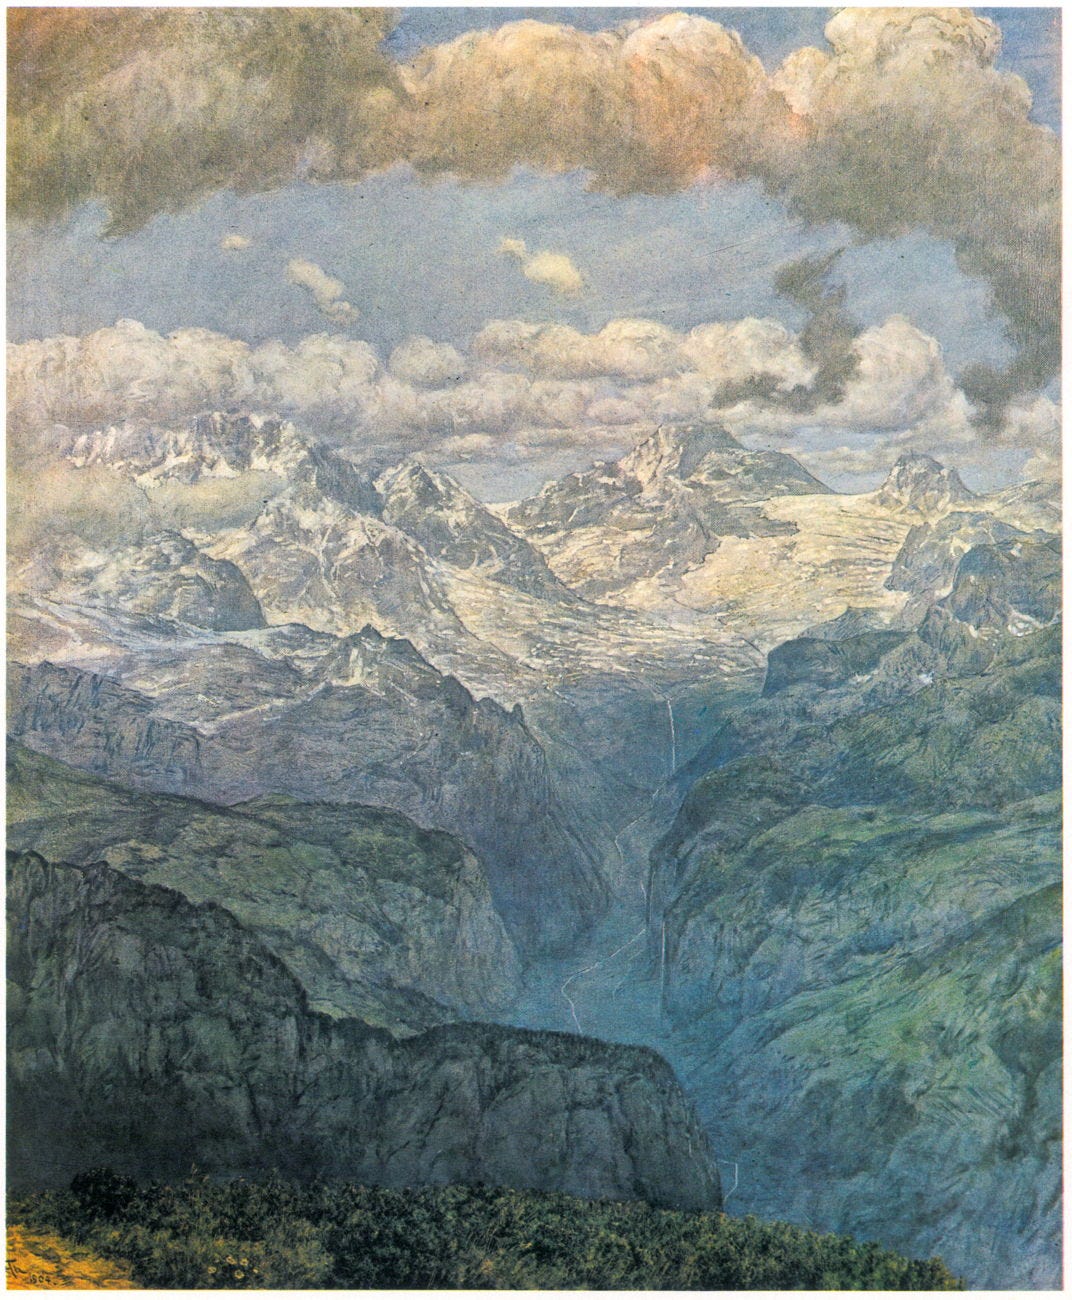 Landscapes and myths of Hans Thoma, 1886-1917 – The Eclectic Light Company